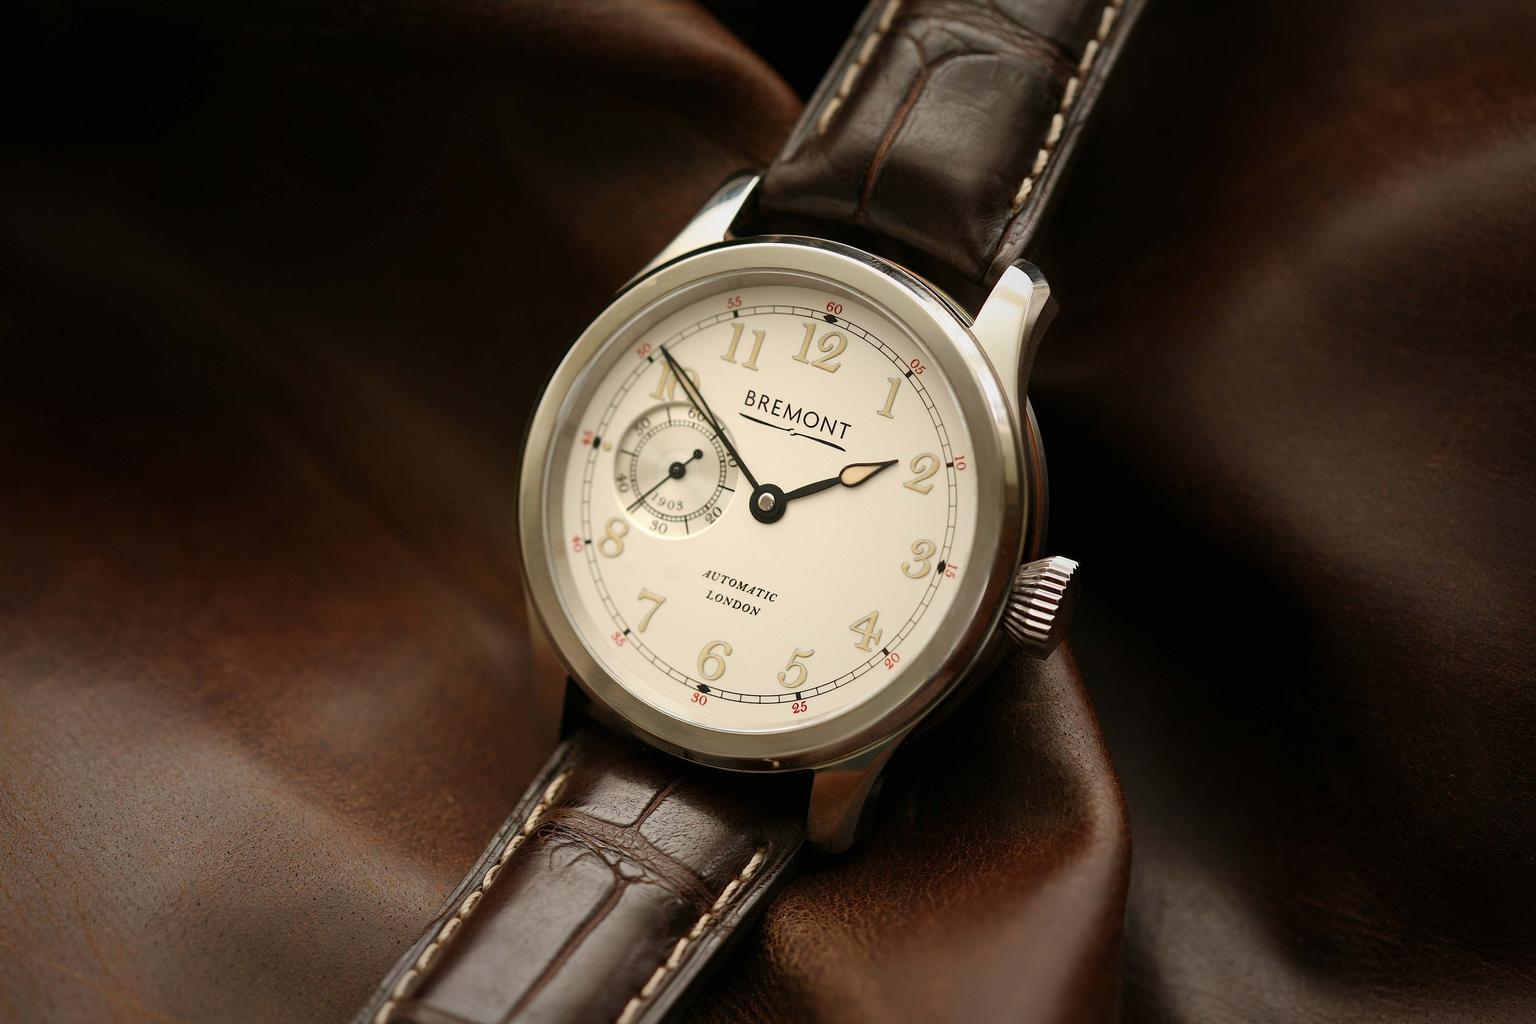 The white gold model of Bremont's new Wright Flyer watch with a white dial, limited to 50 pieces.